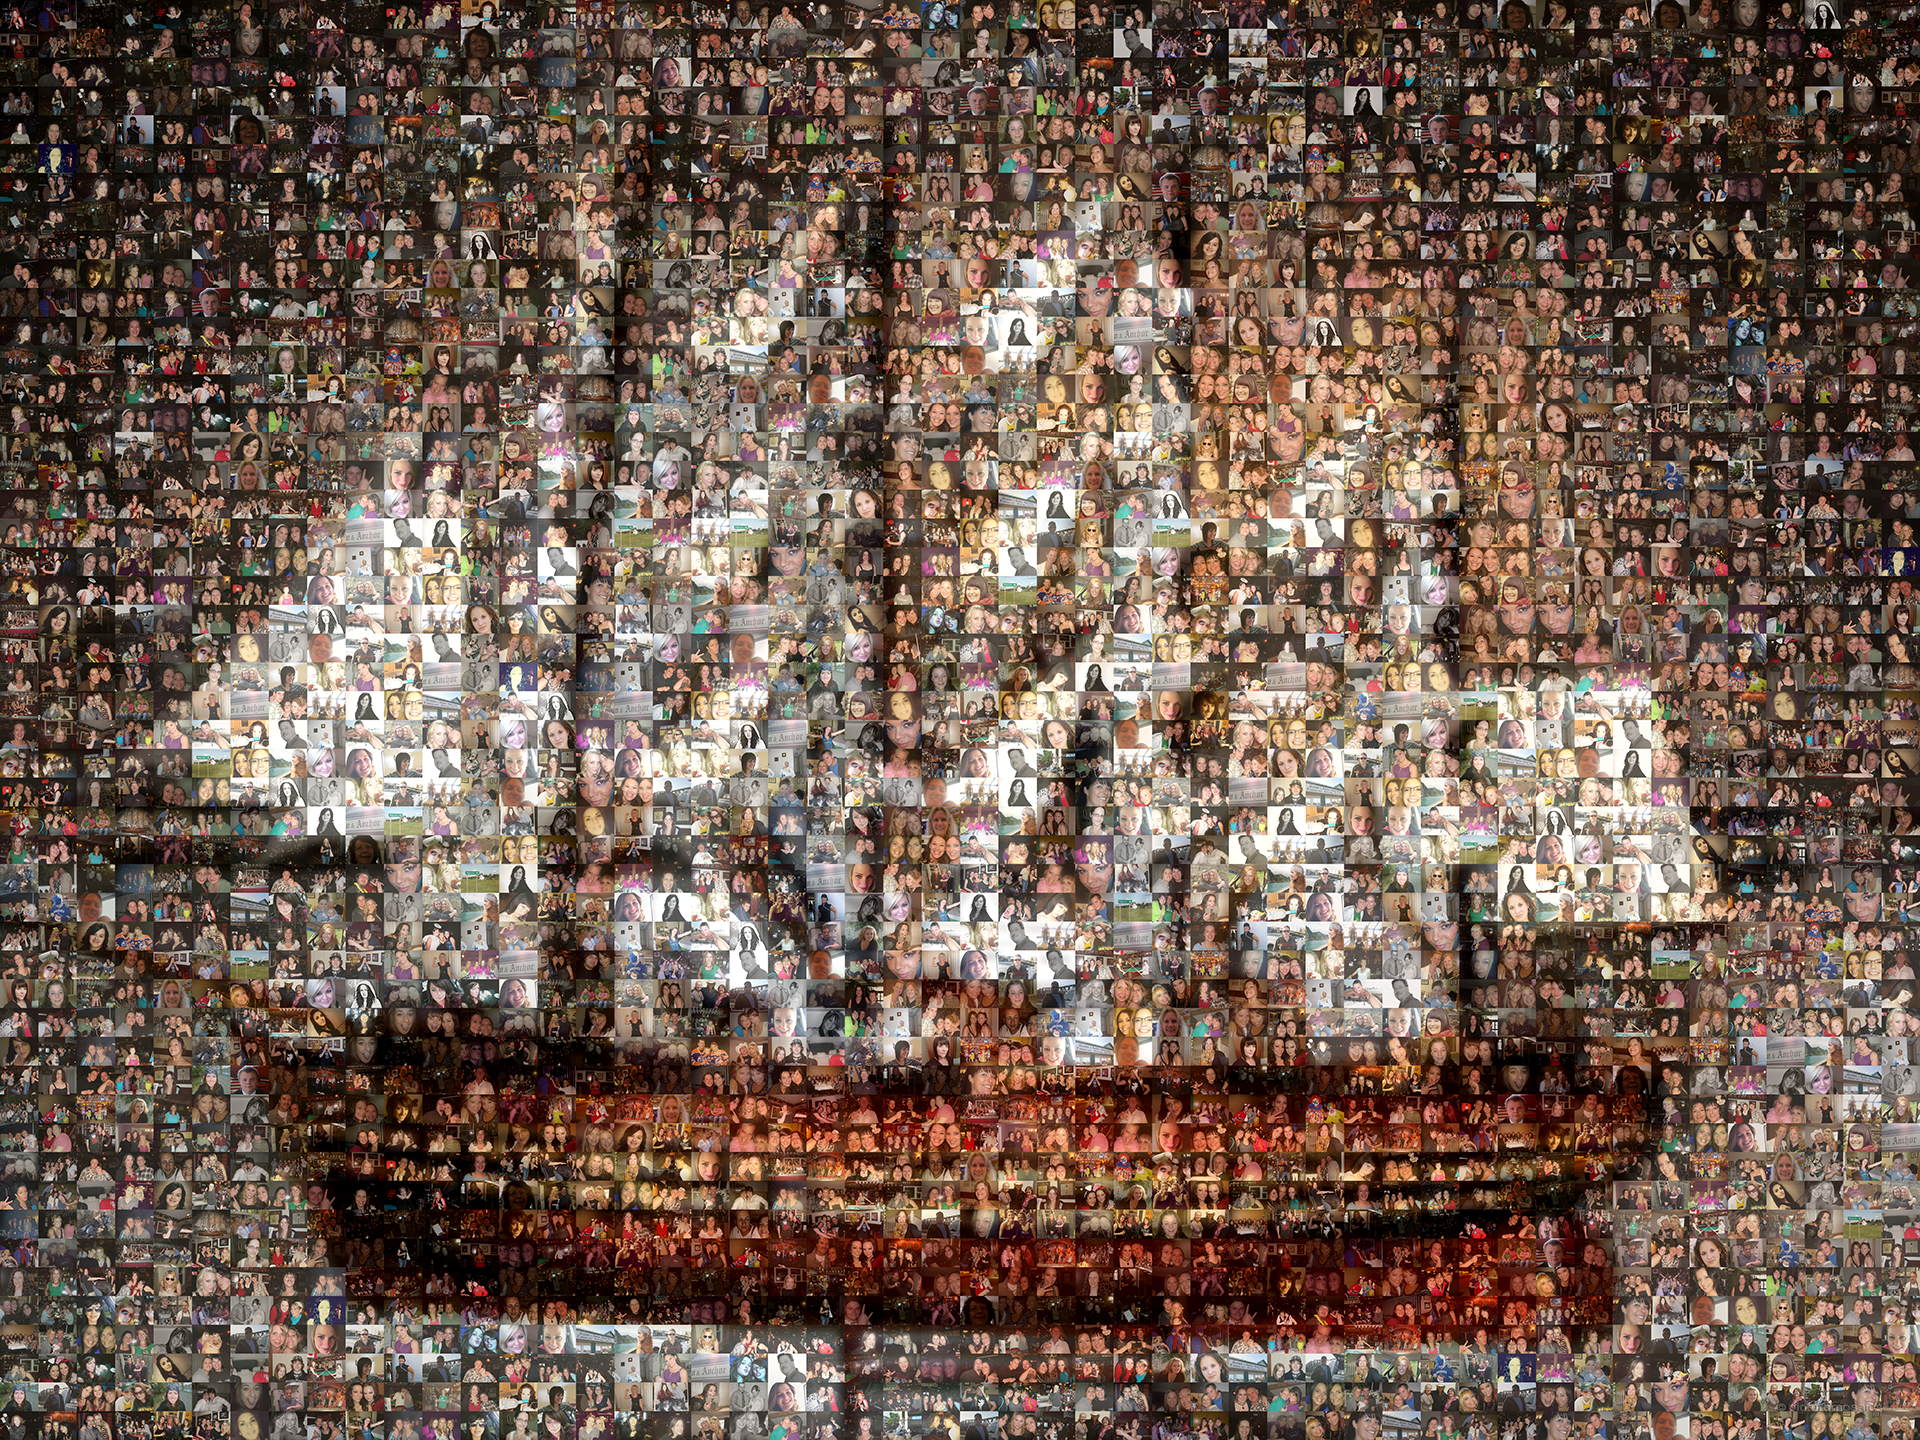 photo mosaic created using 252 photos of friends